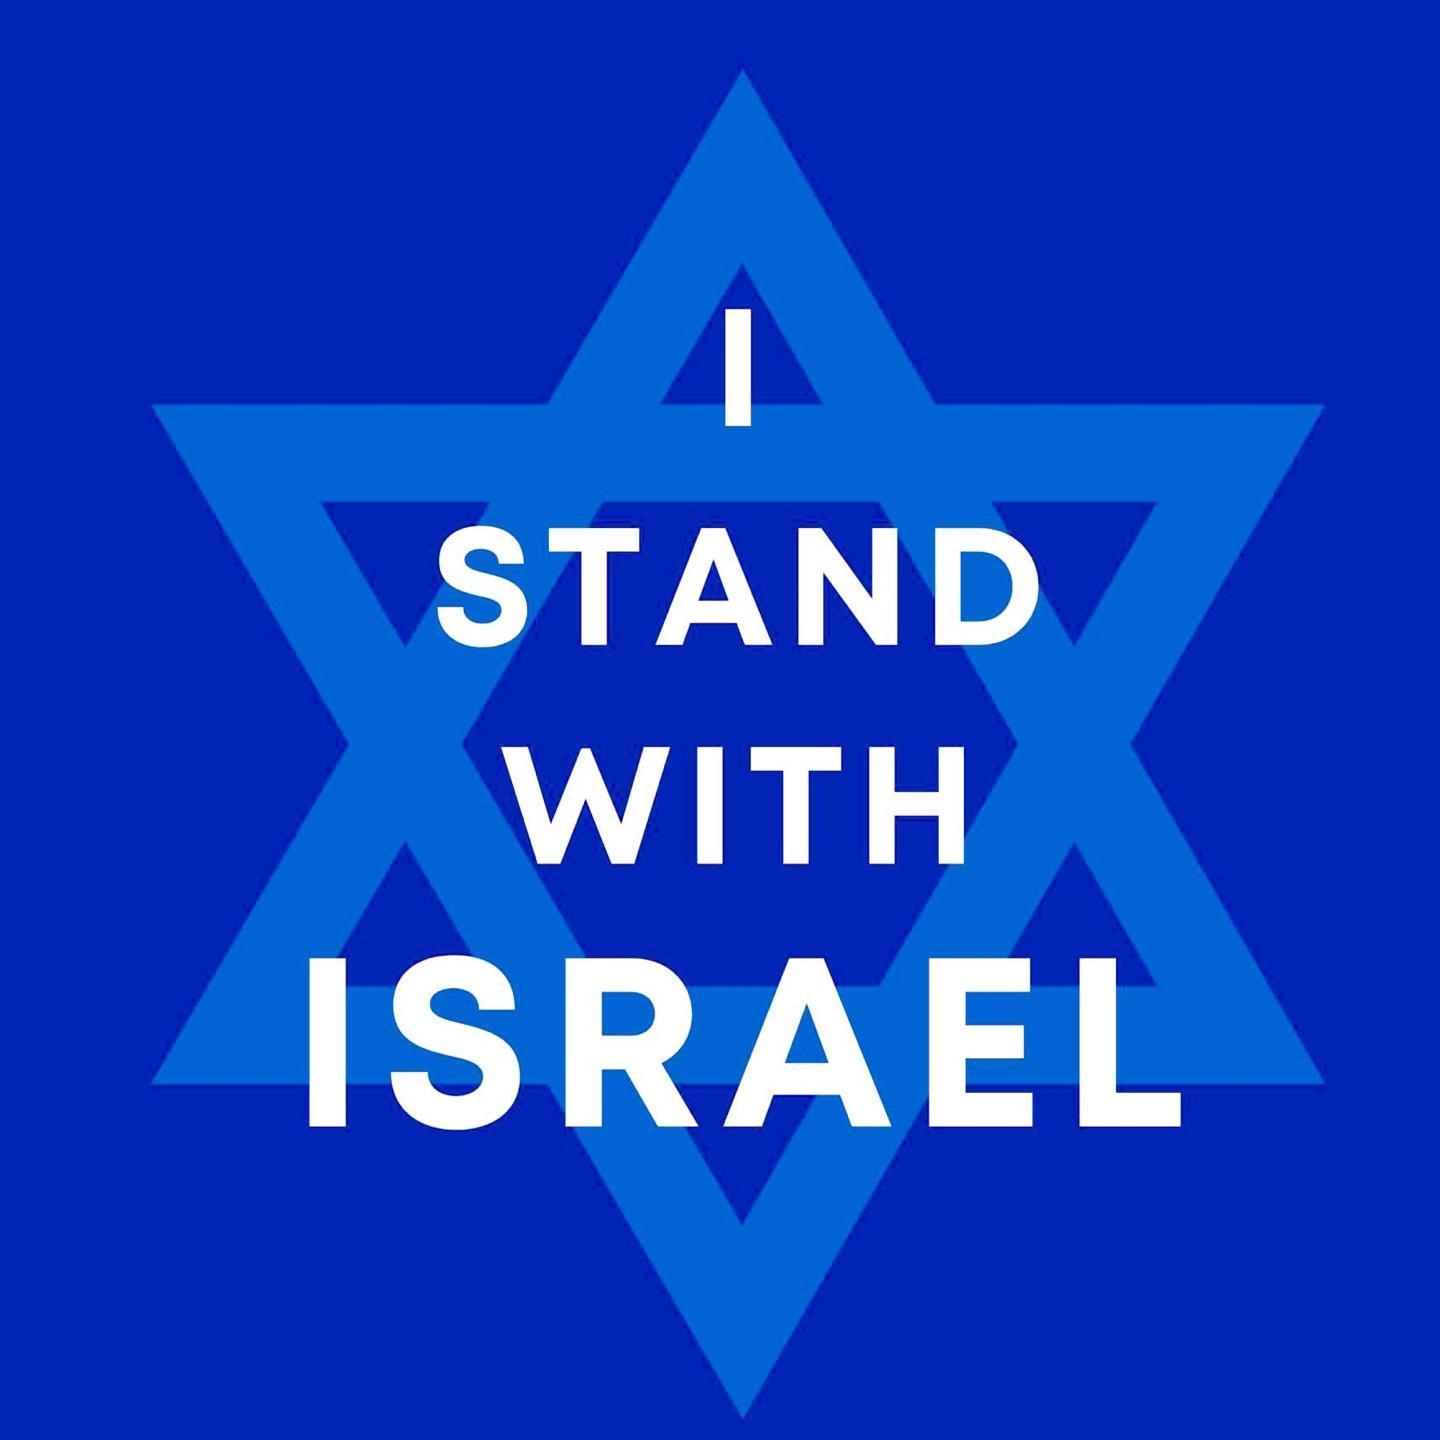 I stand with Israel.jpeg